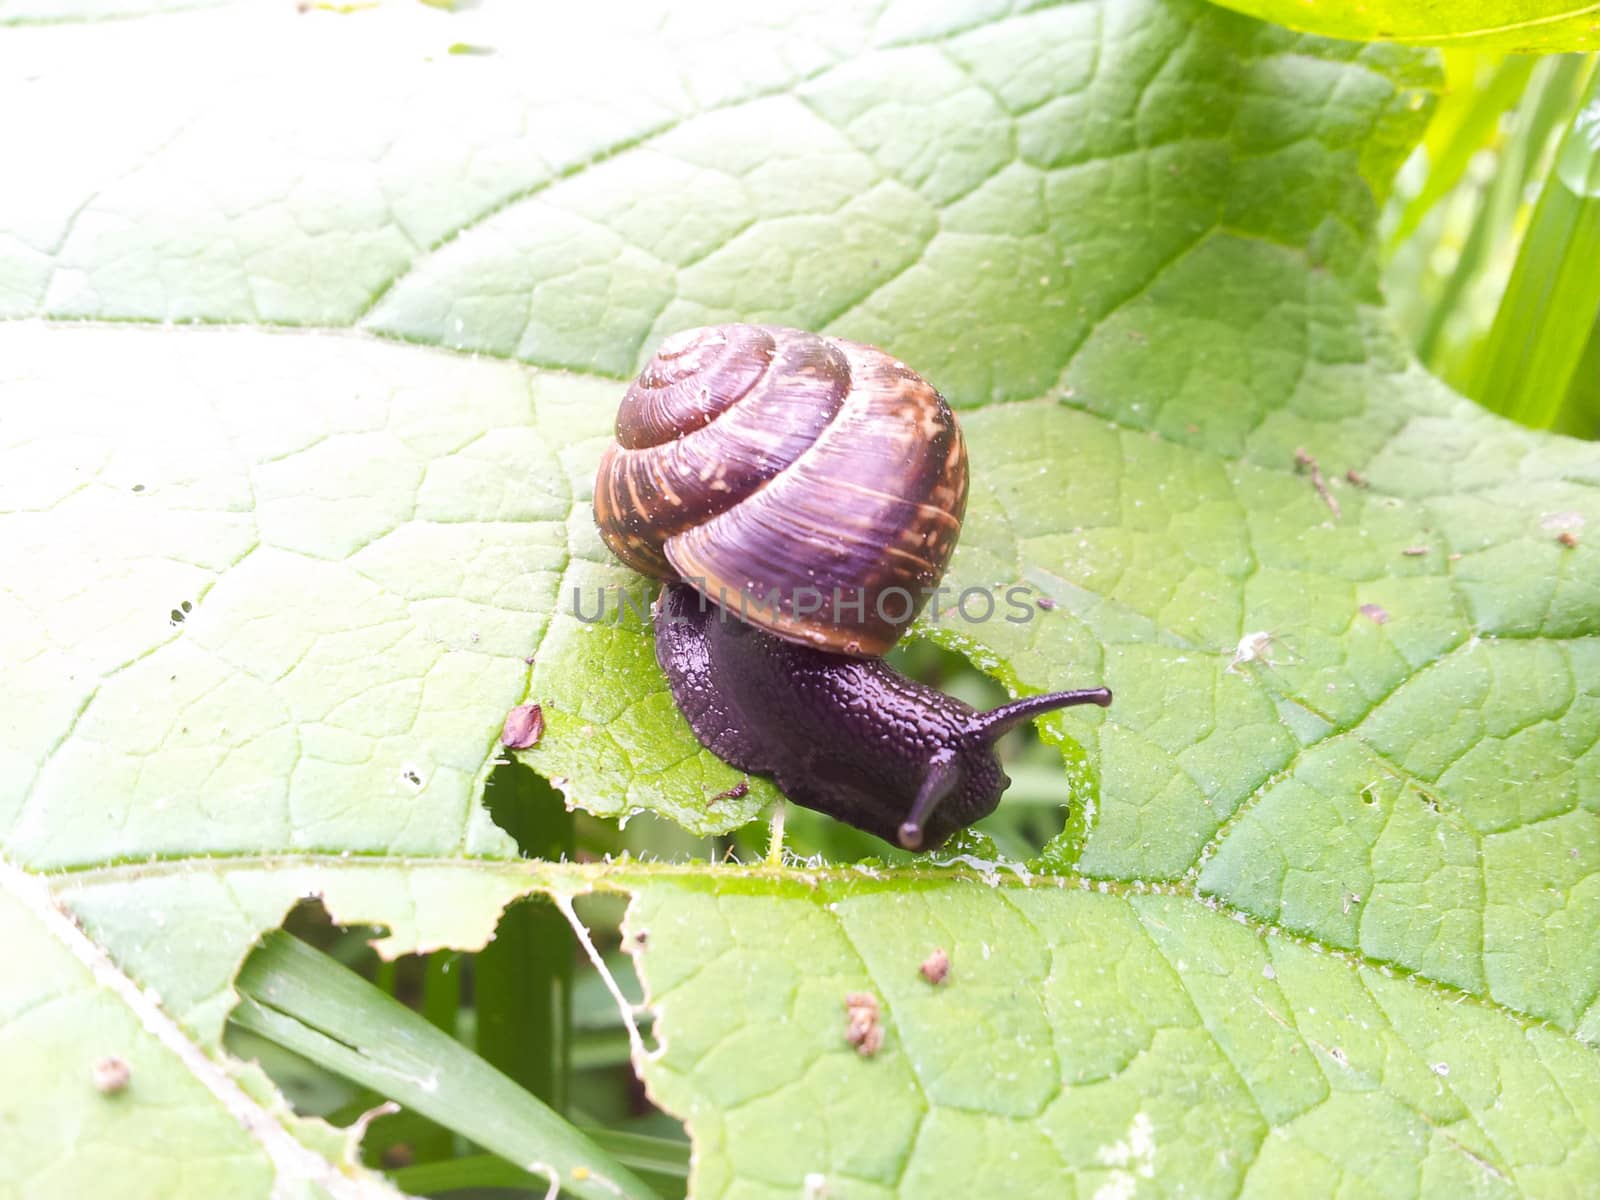 Snail with house, eating by Arvebettum